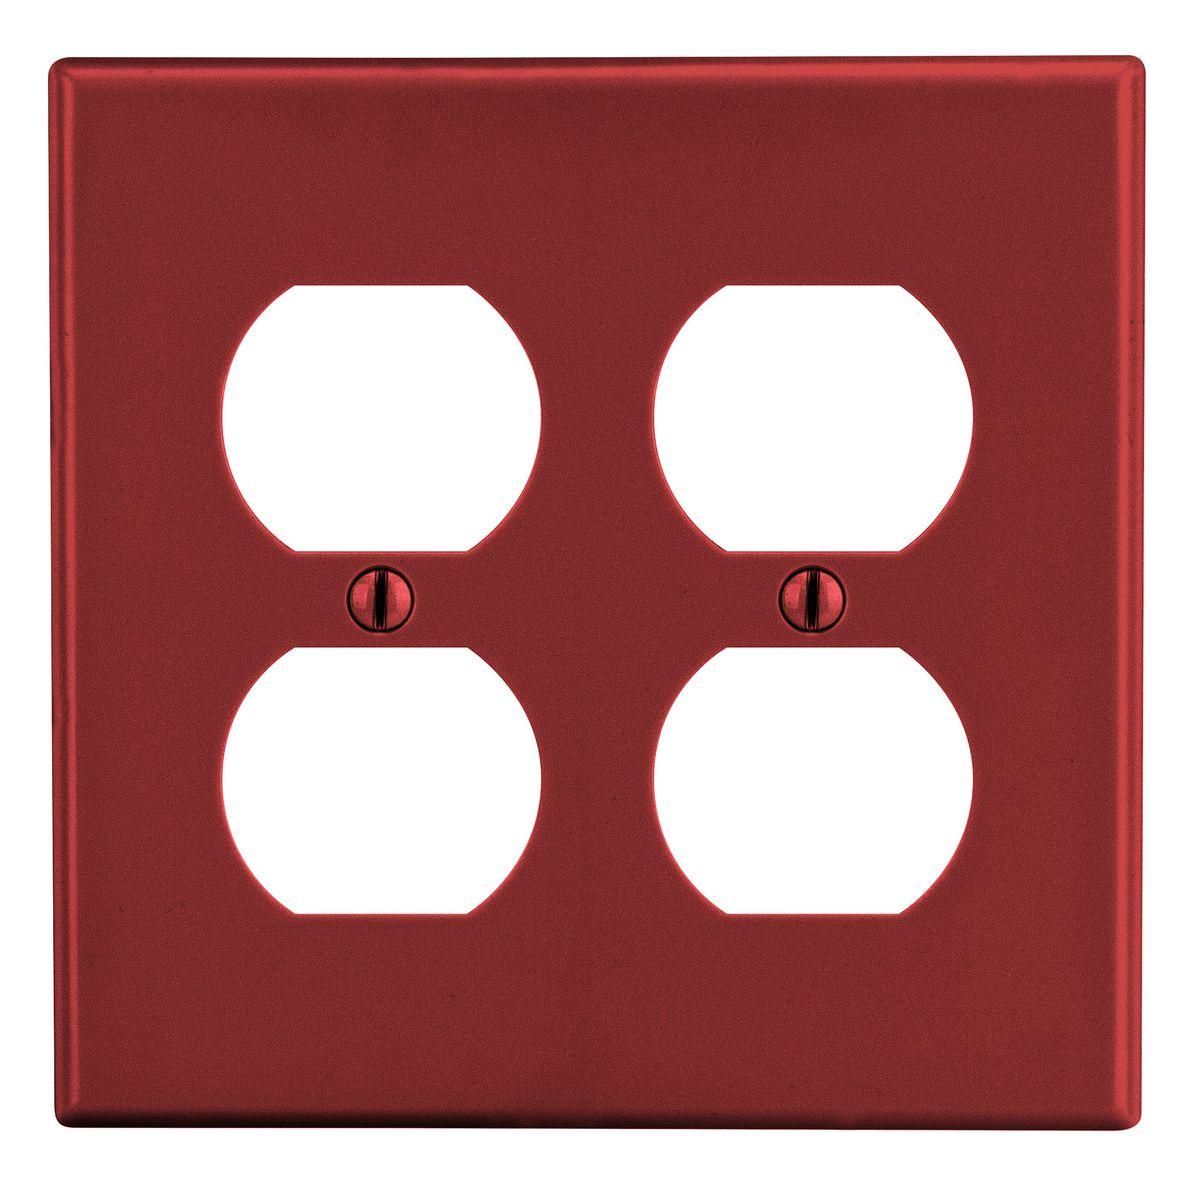 Hubbell PJ82R Wallplate, Mid-Size 2-Gang, 2) Duplex, Red  ; High-impact, self-extinguishing polycarbonate material ; More Rigid ; Sharp lines and less dimpling ; Smooth satin finish ; Blends into wall with an optimum finish ; Smooth Satin Finish